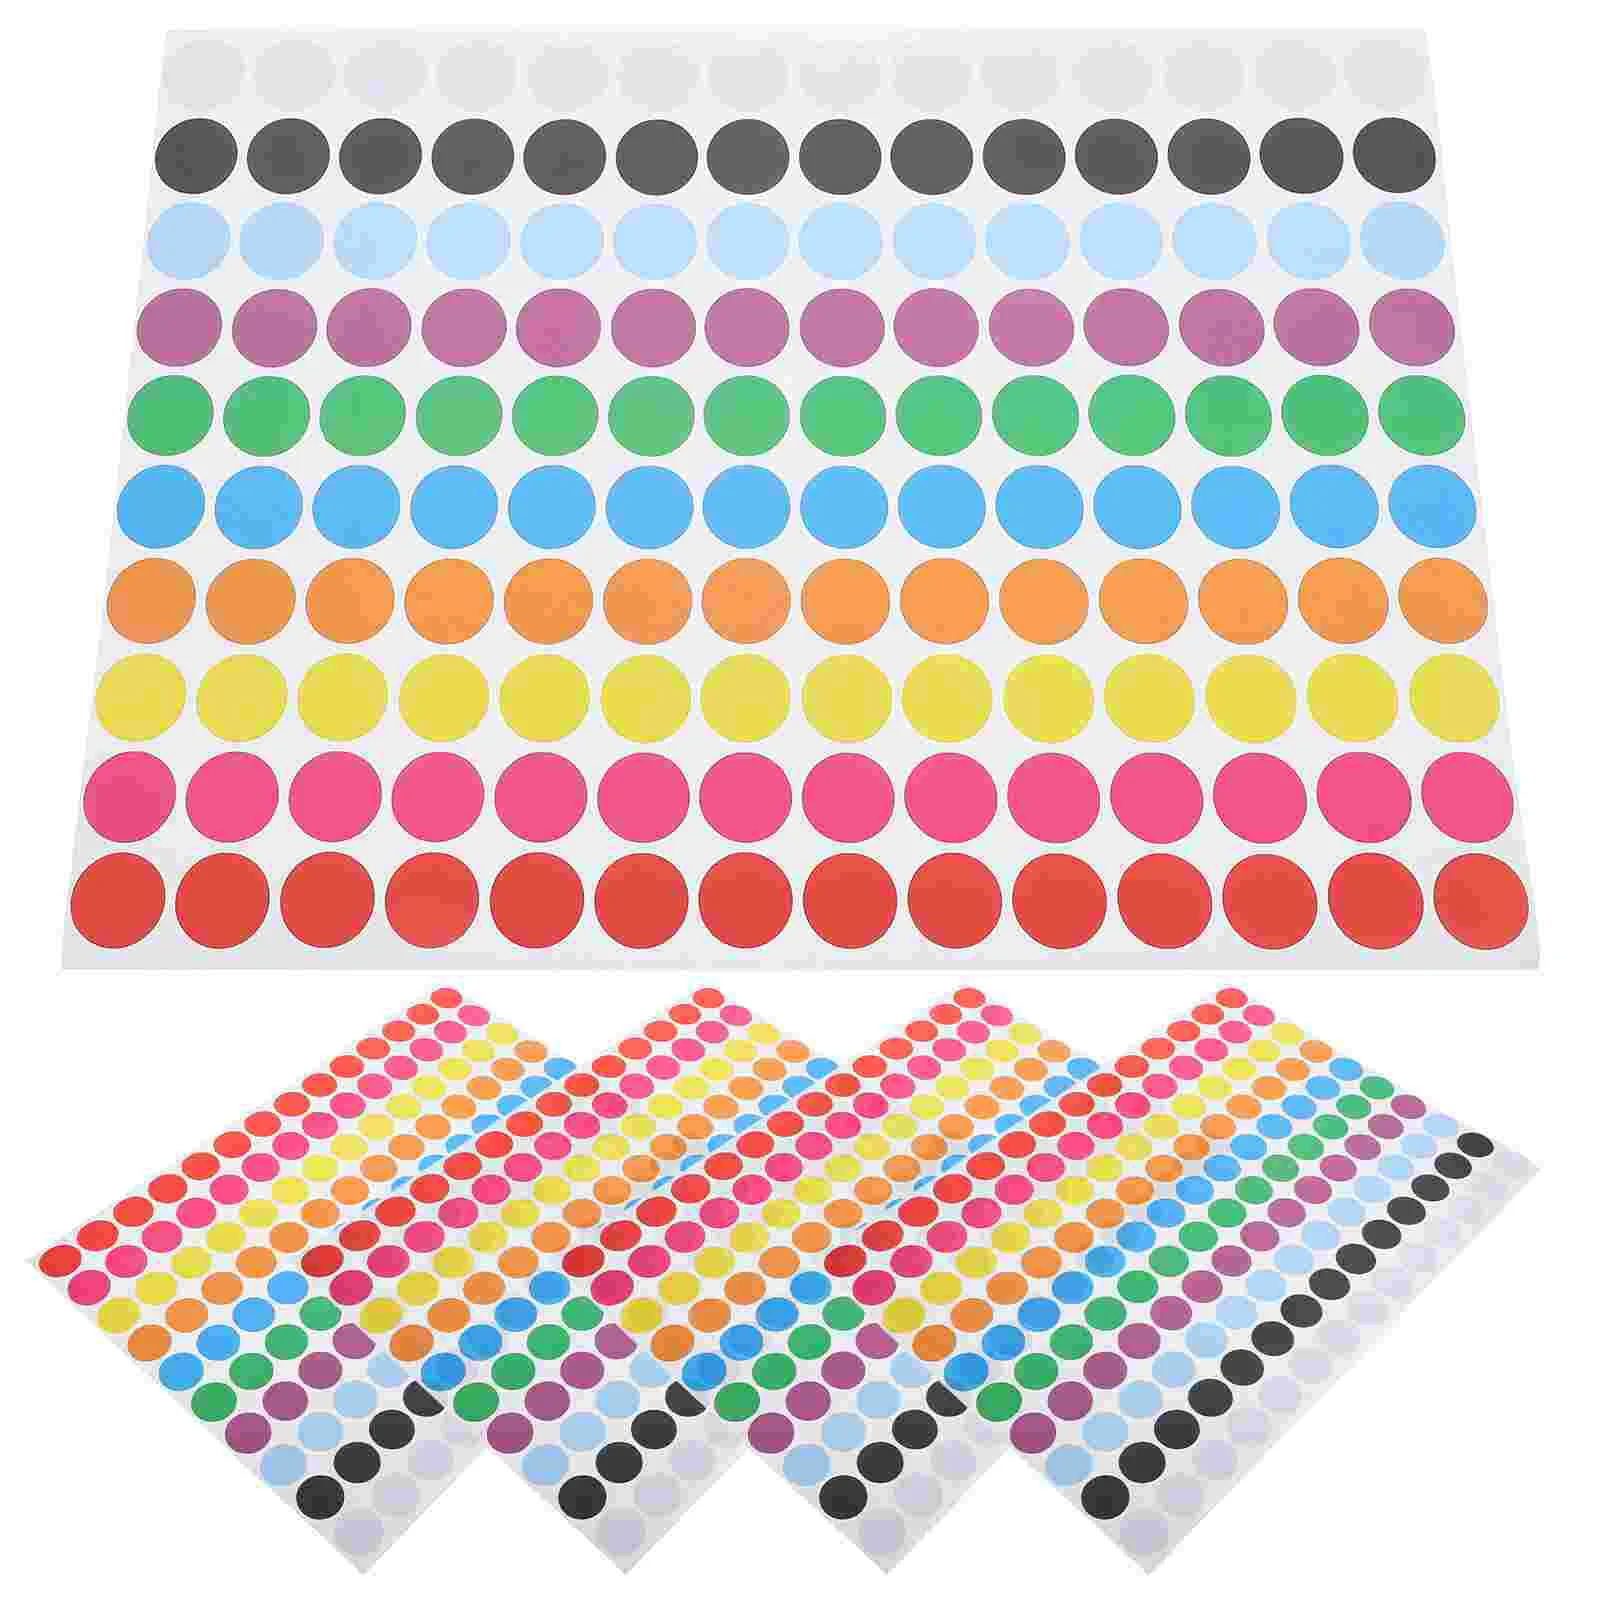 

5 Sheets of Colored Round Labels Stickers Classification Stickers Dot Stickers Decors Round Paper Stickers